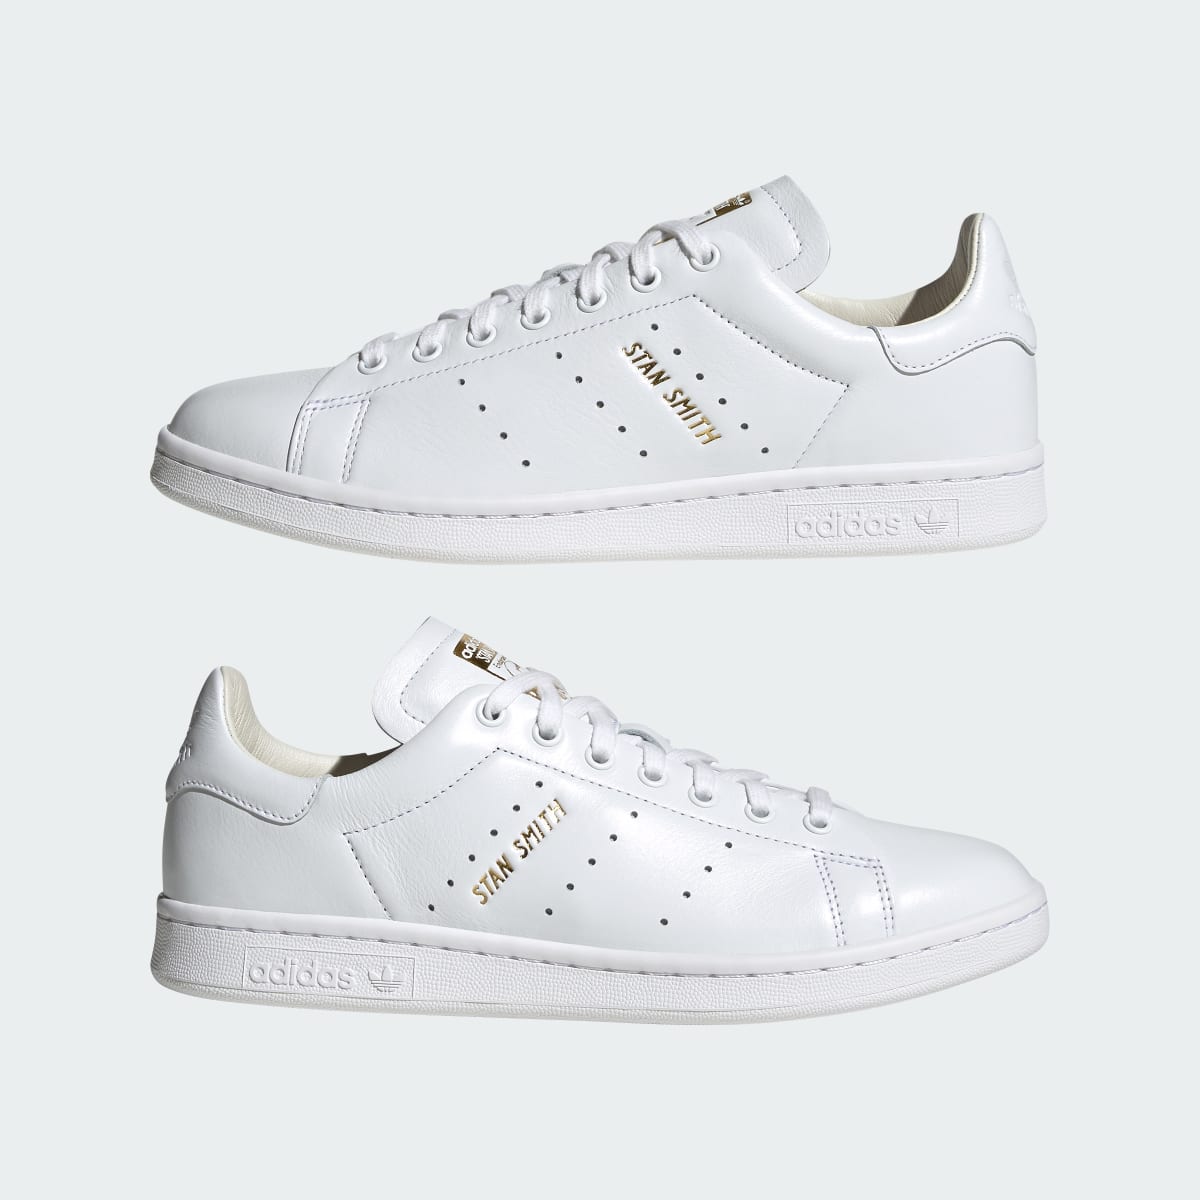 Adidas Stan Smith Lux Shoes. 9